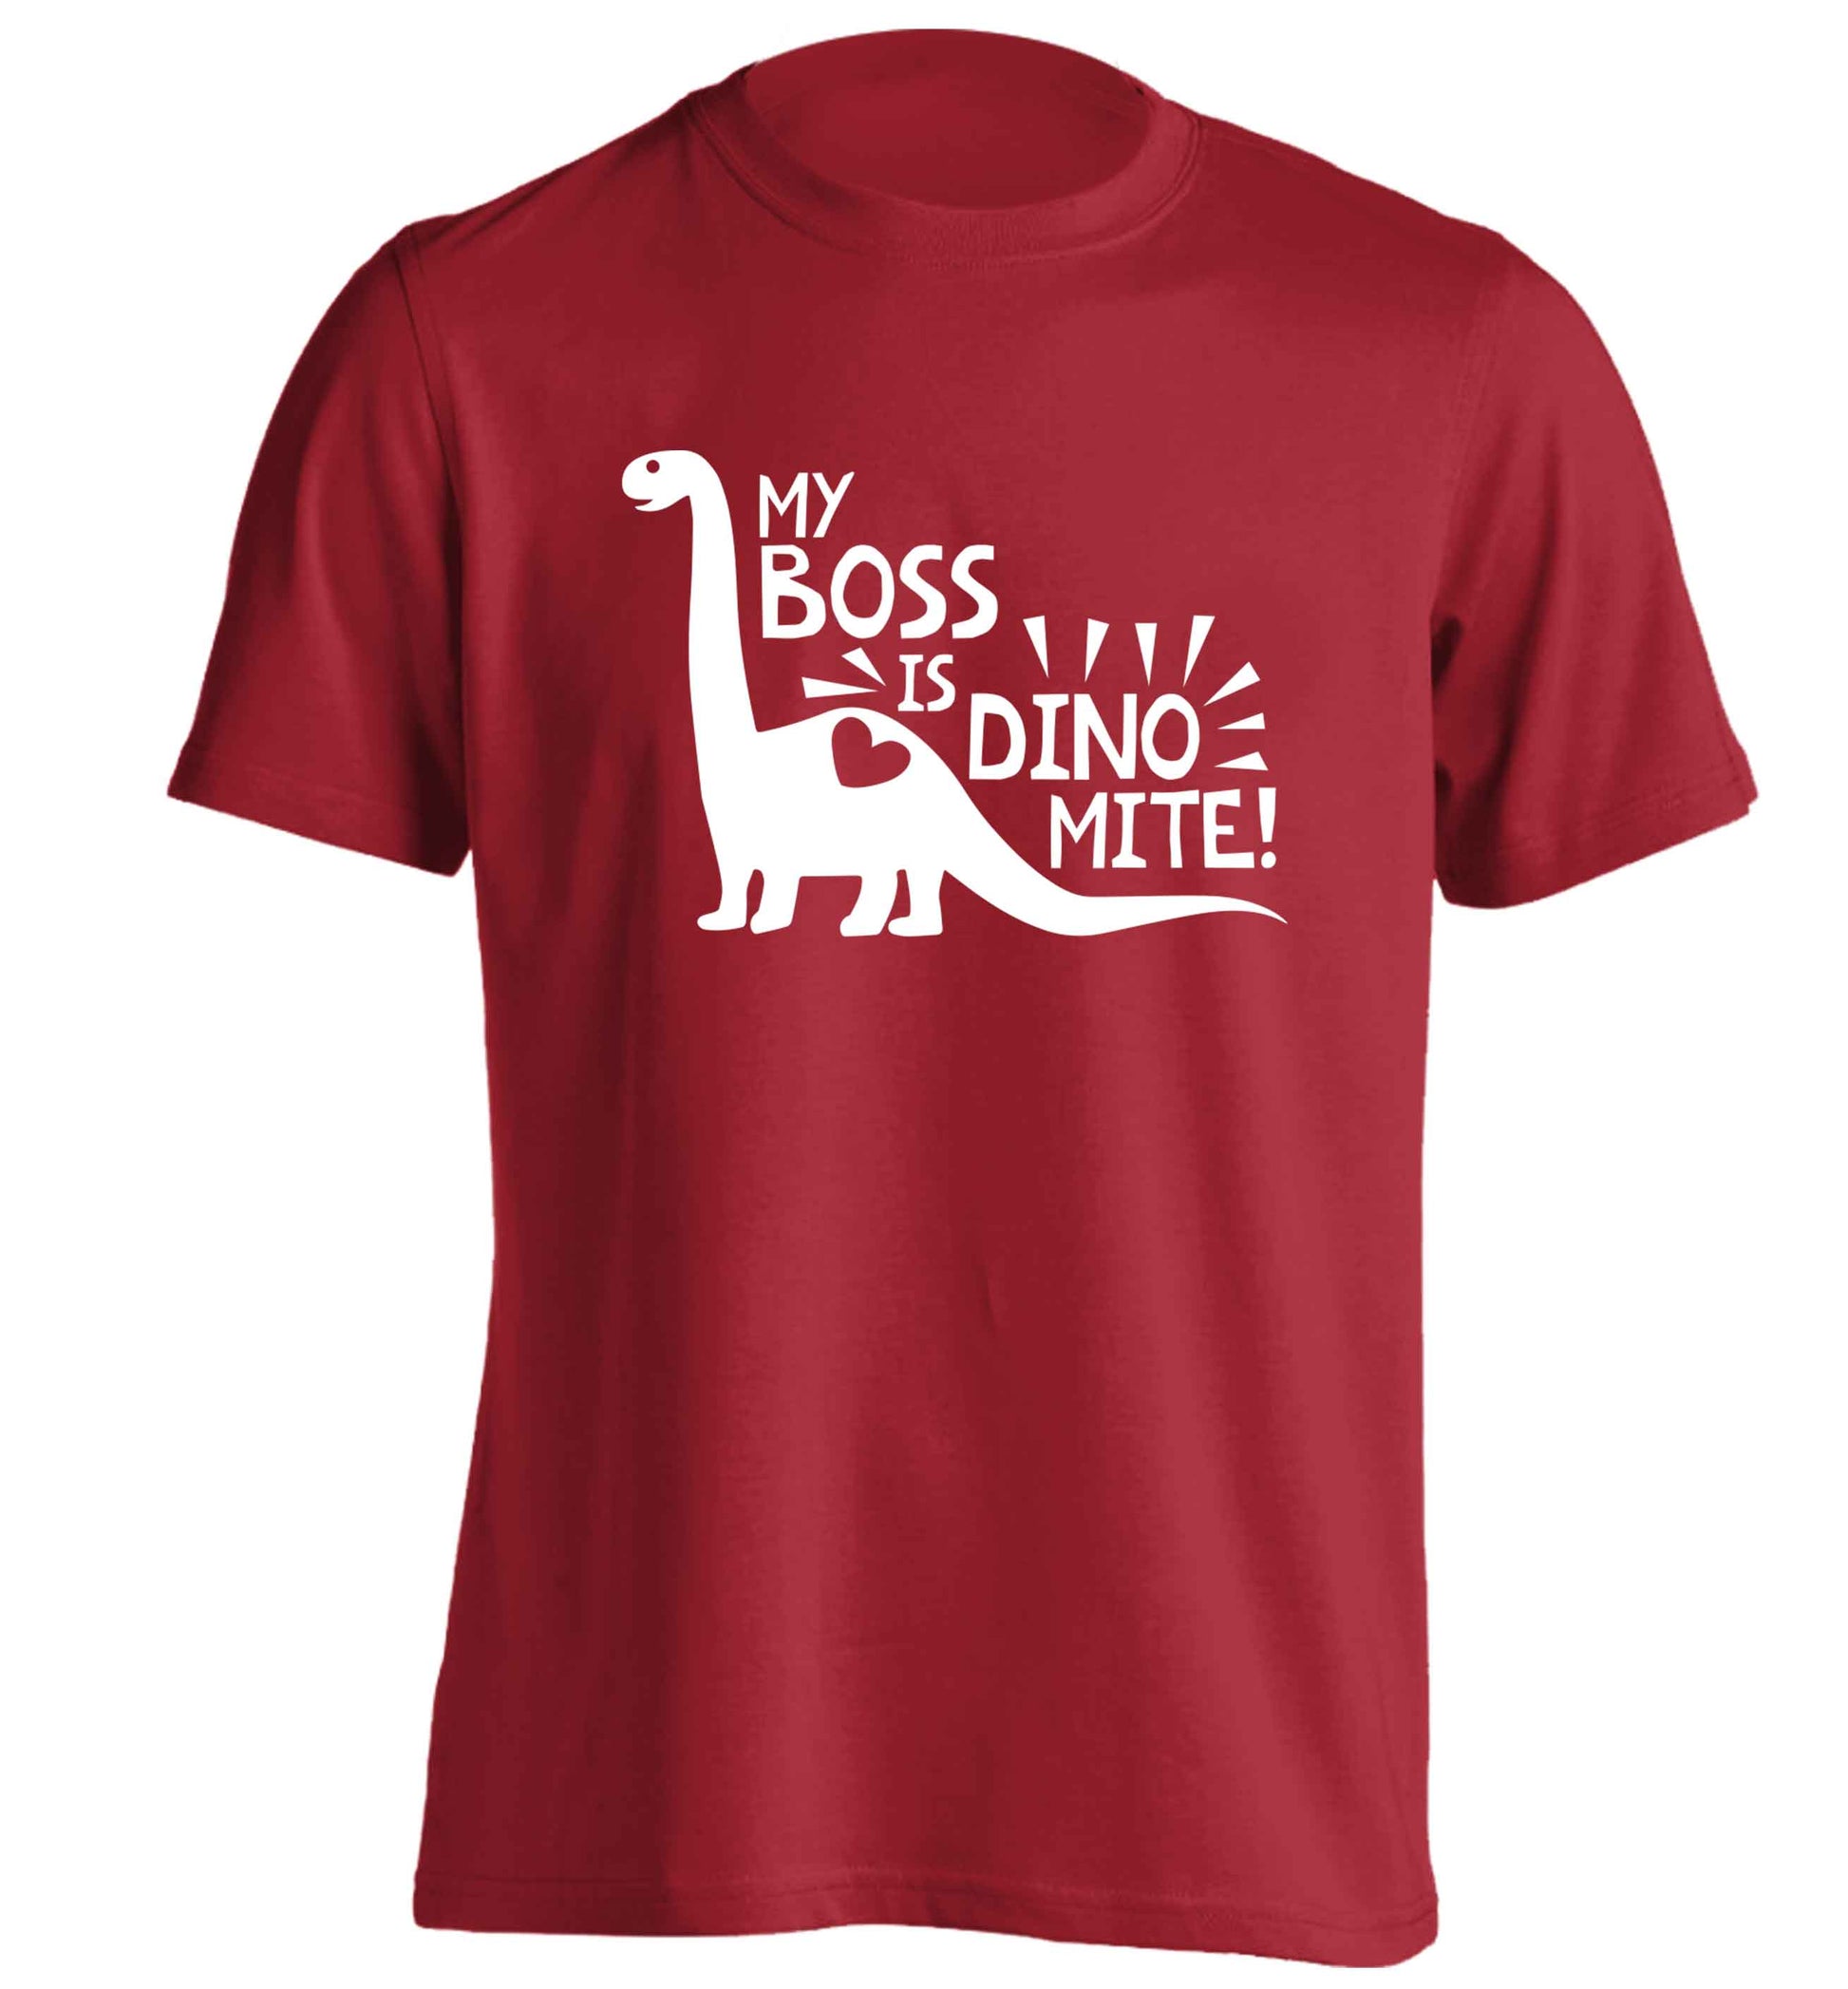 My boss is dinomite! adults unisex red Tshirt 2XL